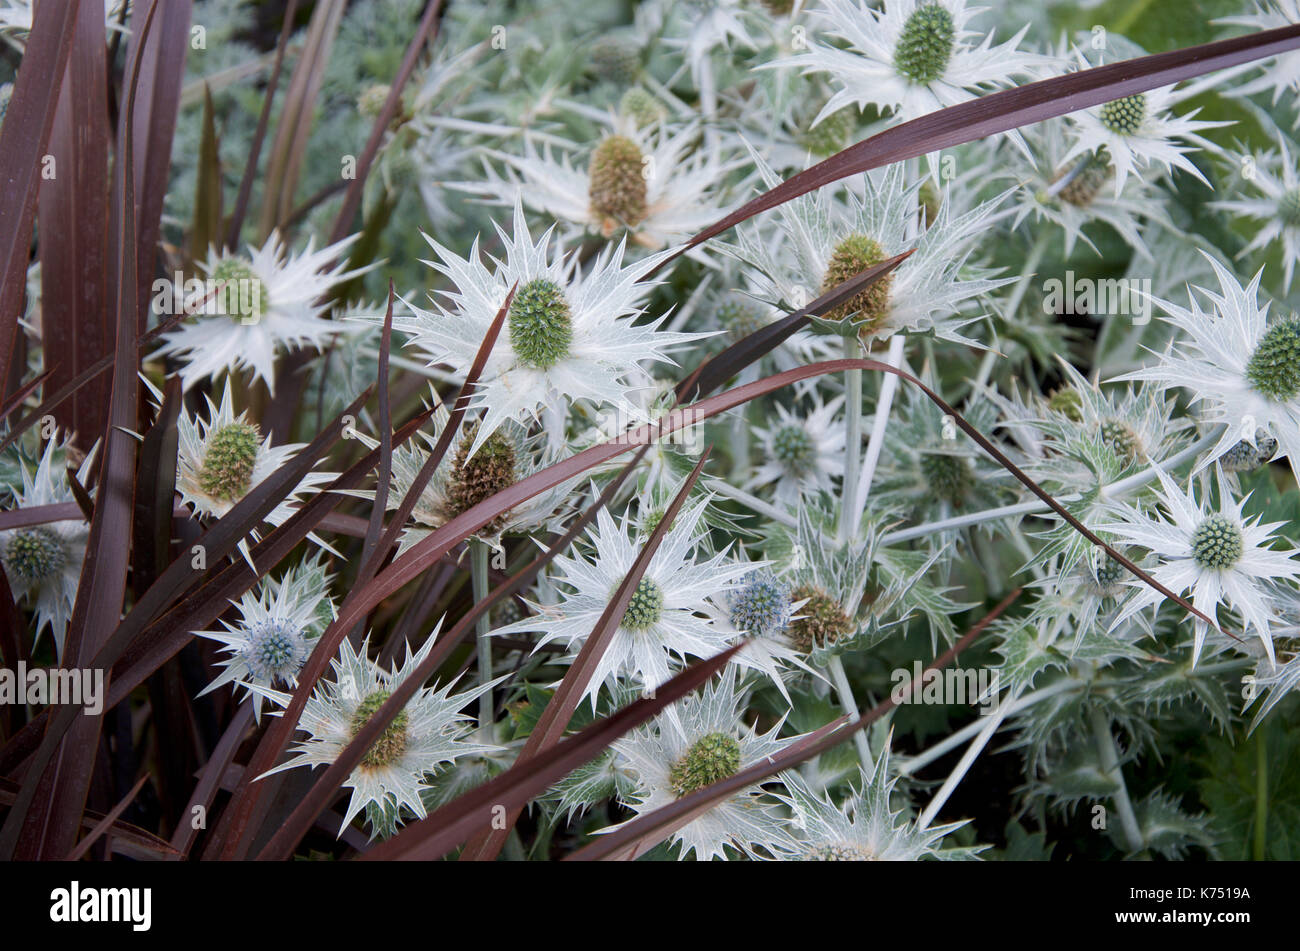 Eryngium giganteum Silver Ghost planted with New Zealand Flax or Phormium Stock Photo